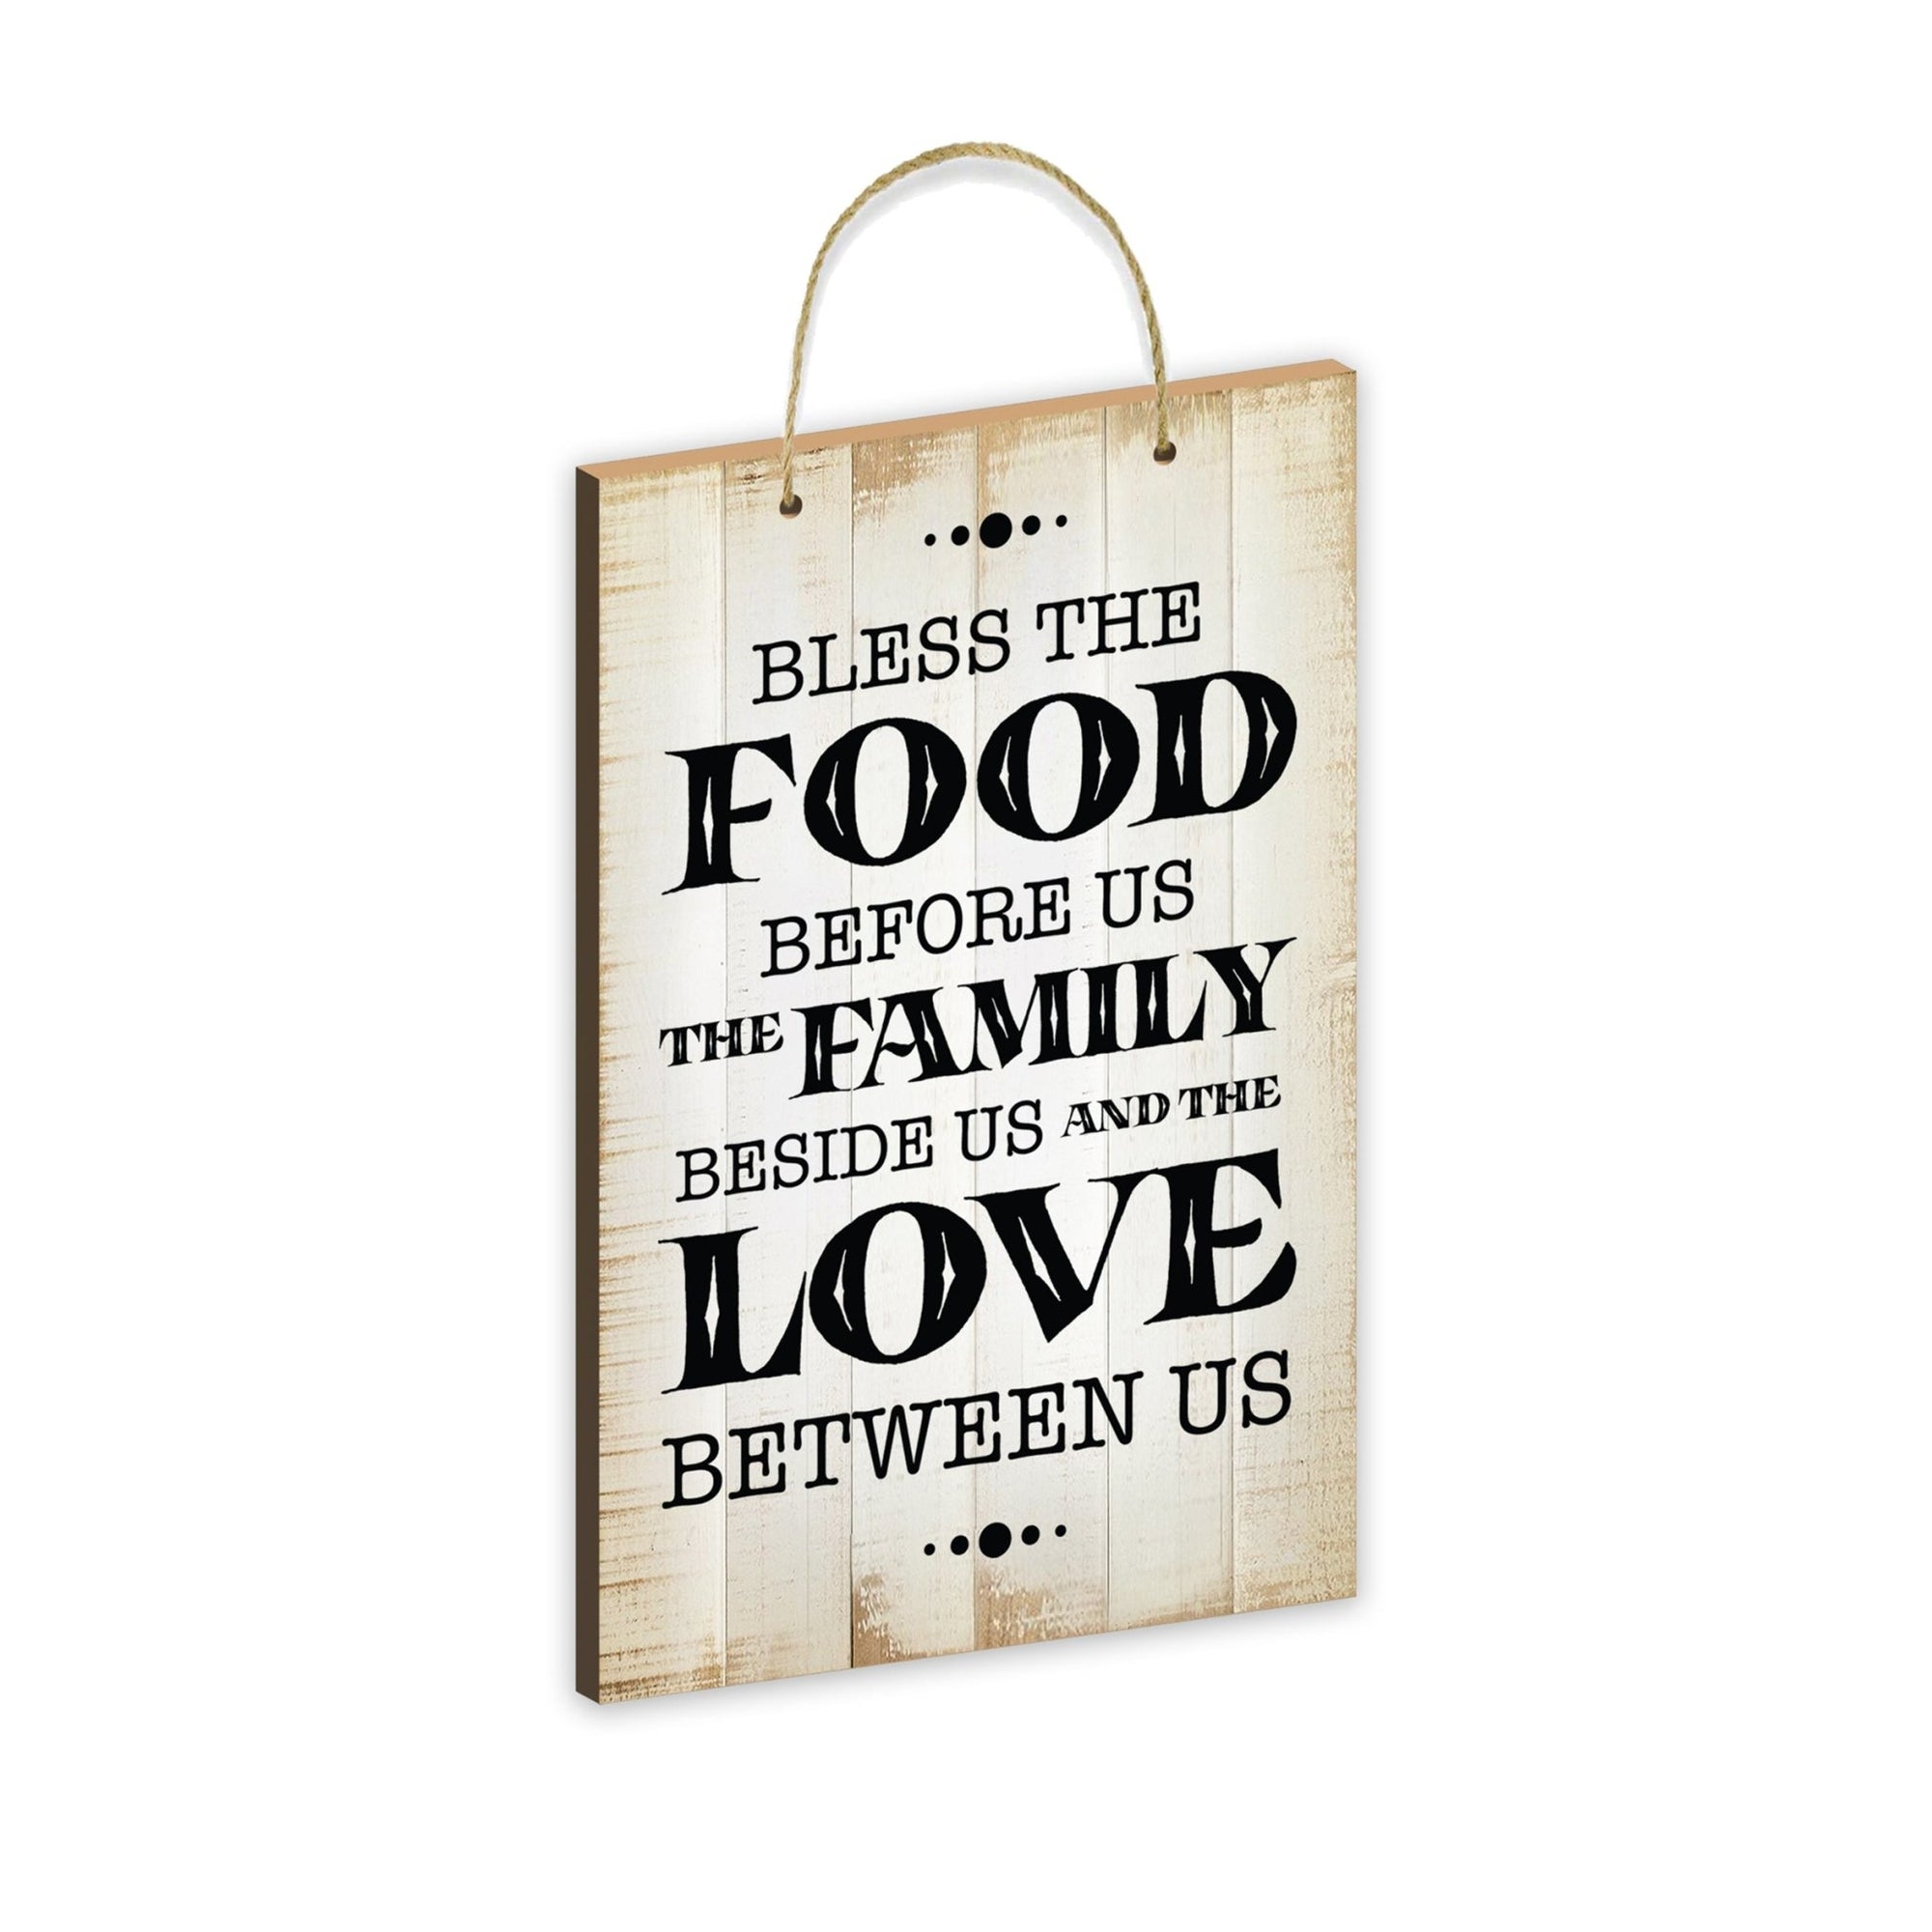 Inspirational Rustic Wooden Wall Hanging Rope Sign Kitchen Décor - Bless The Food Before Us